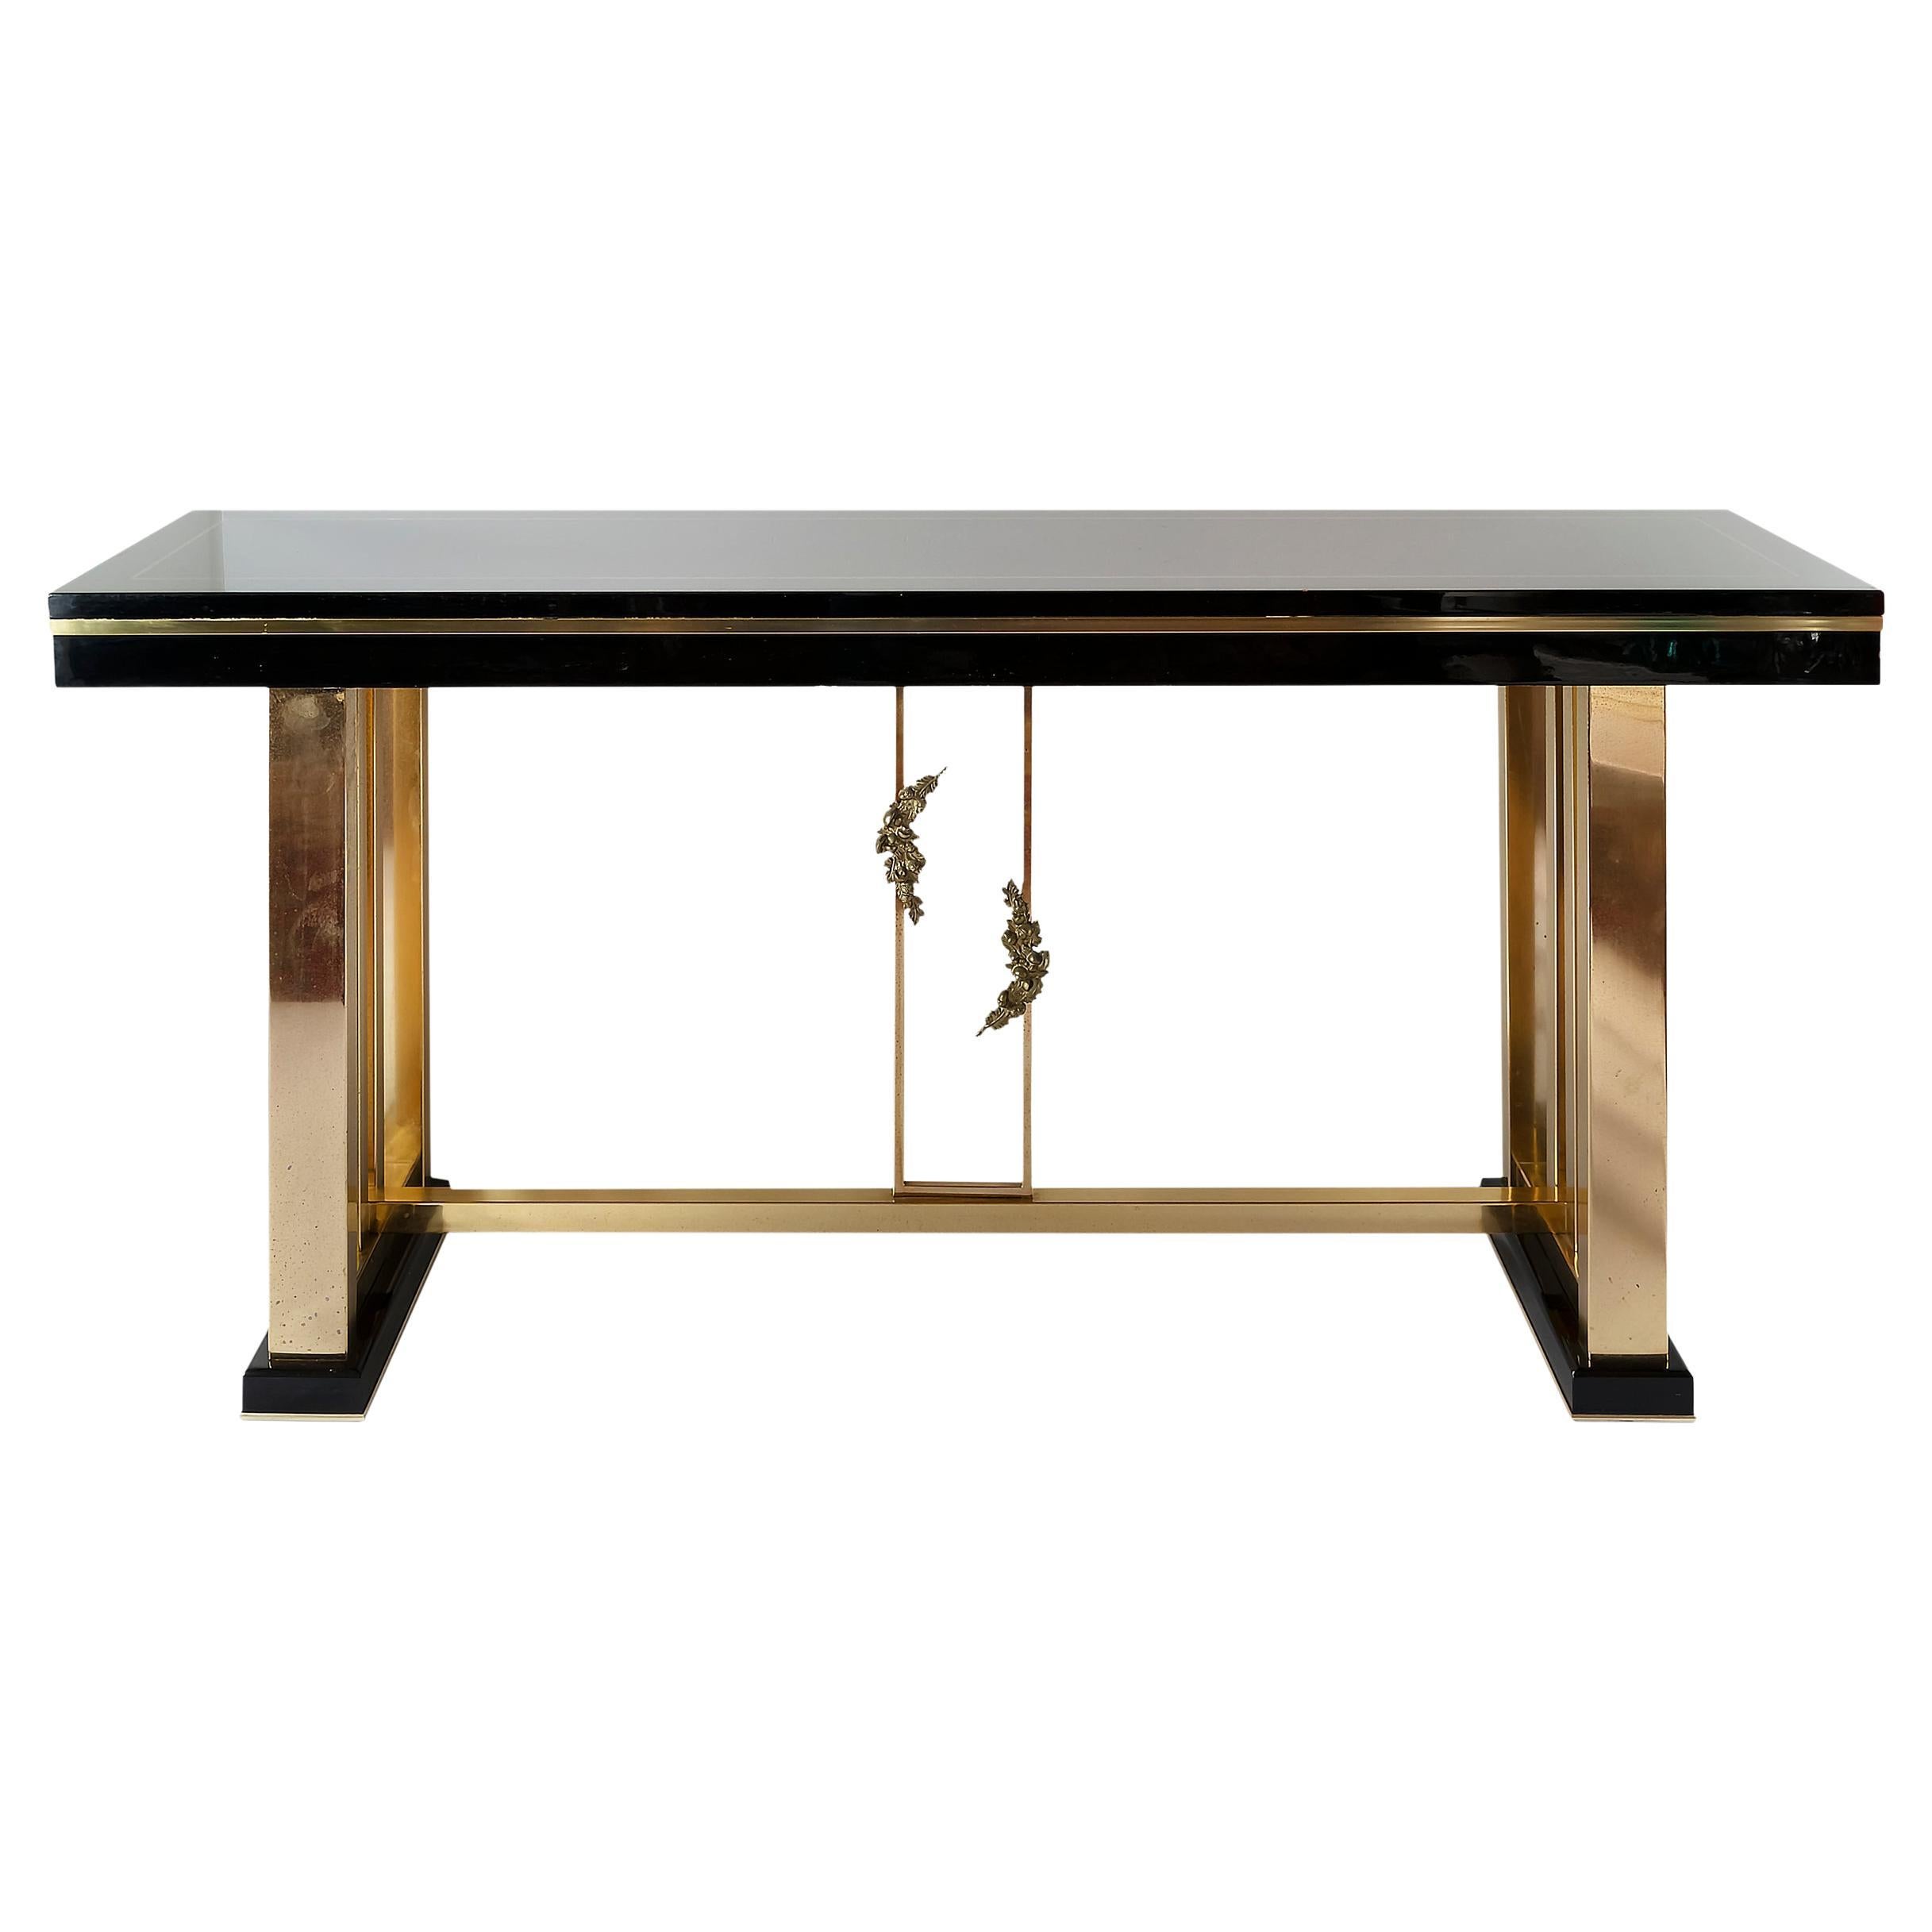 Italian Mid-Century Lacquered Wood and Gilt Metal Console Table